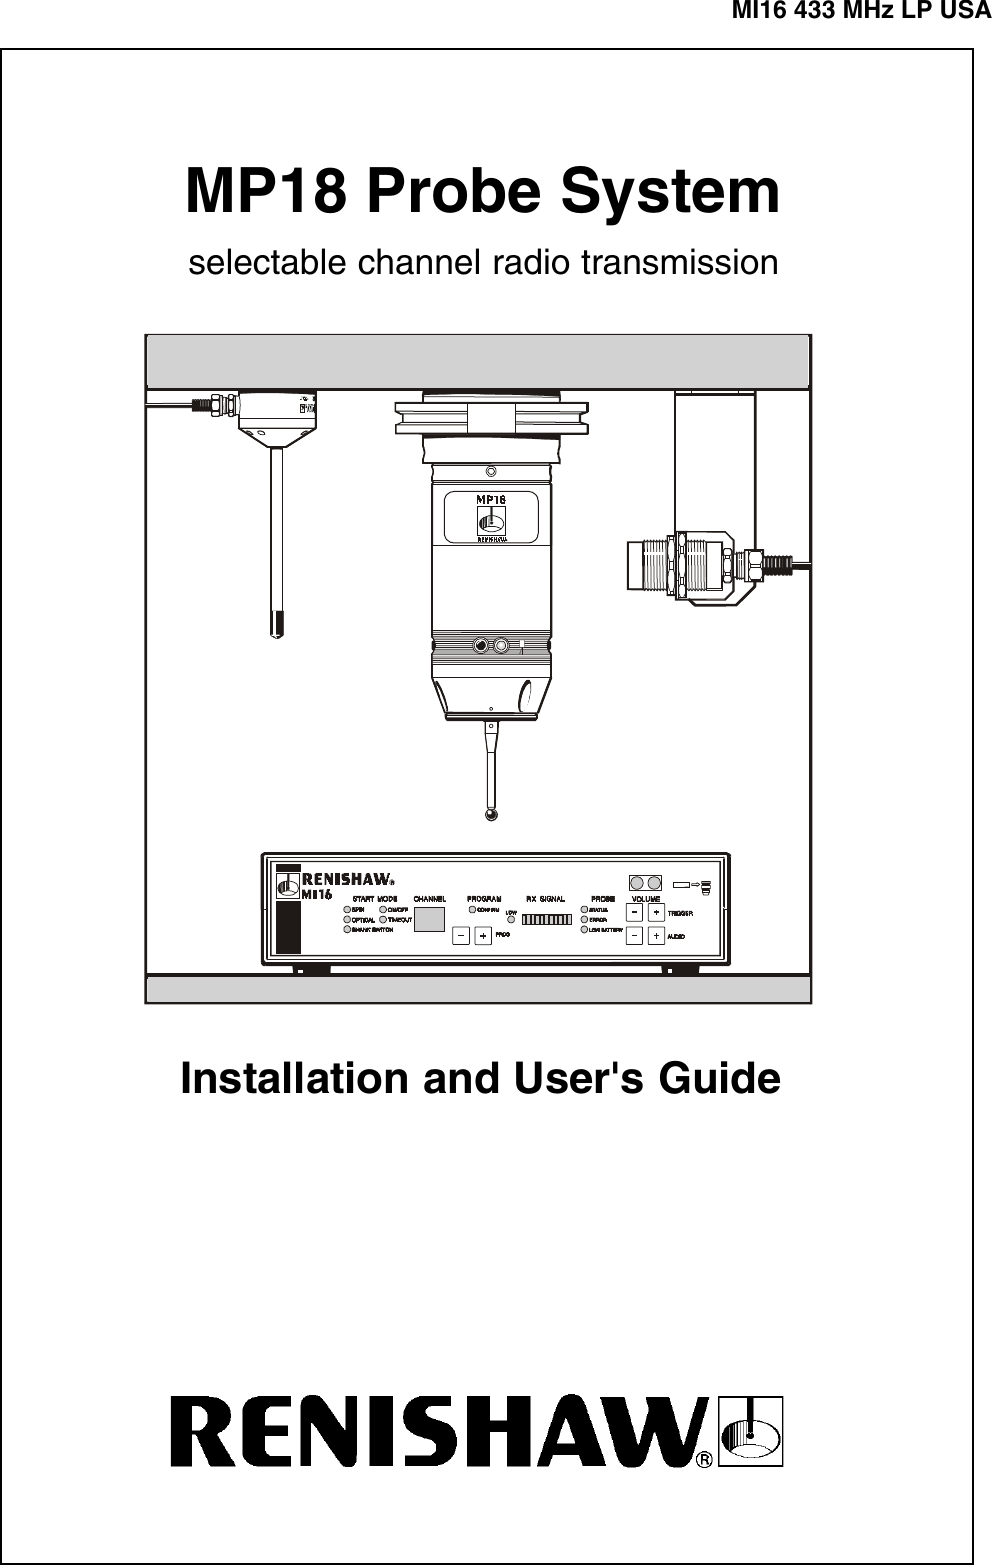 MI16 433 MHz LP USAMP18 Probe Systemselectable channel radio transmissionInstallation and User&apos;s Guide